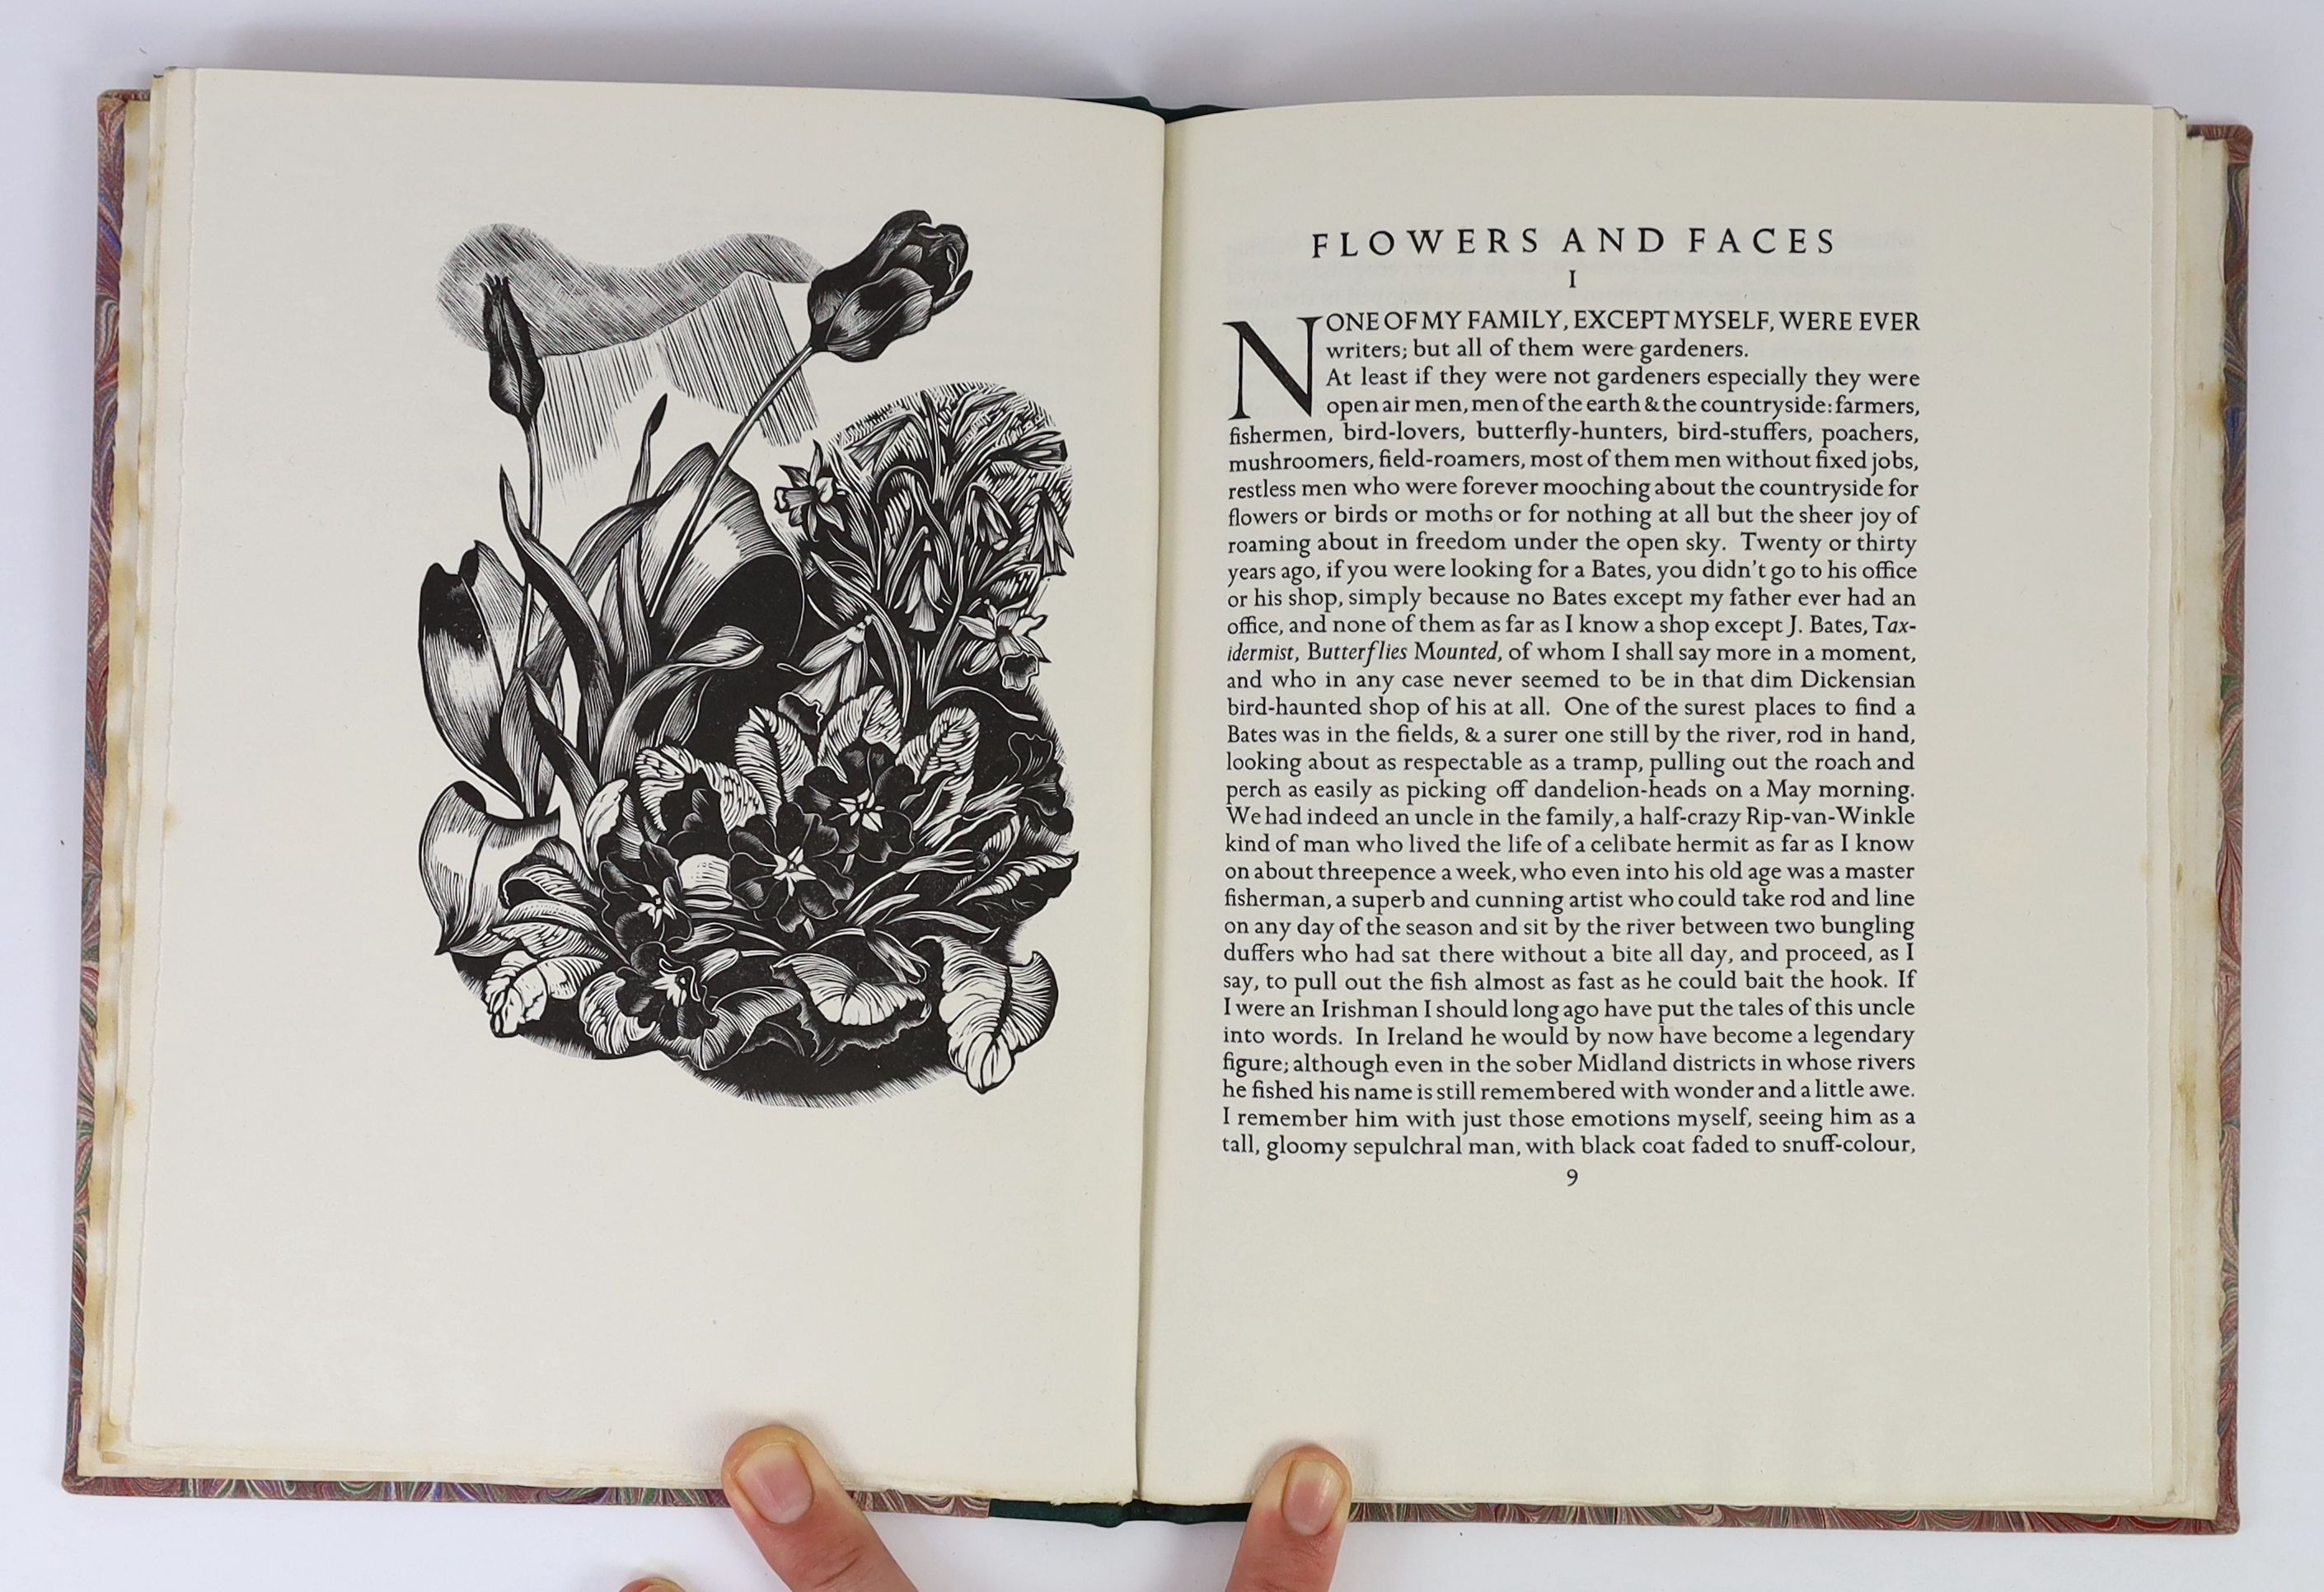 Golden Cockerel Press - Bates, Herbert Ernest - Flowers and Faces, one of 325, signed by the author, illustrated by John Nash, with engraved title and 4 fullpage wood-engravings, 4to, quarter green morocco with marbled p